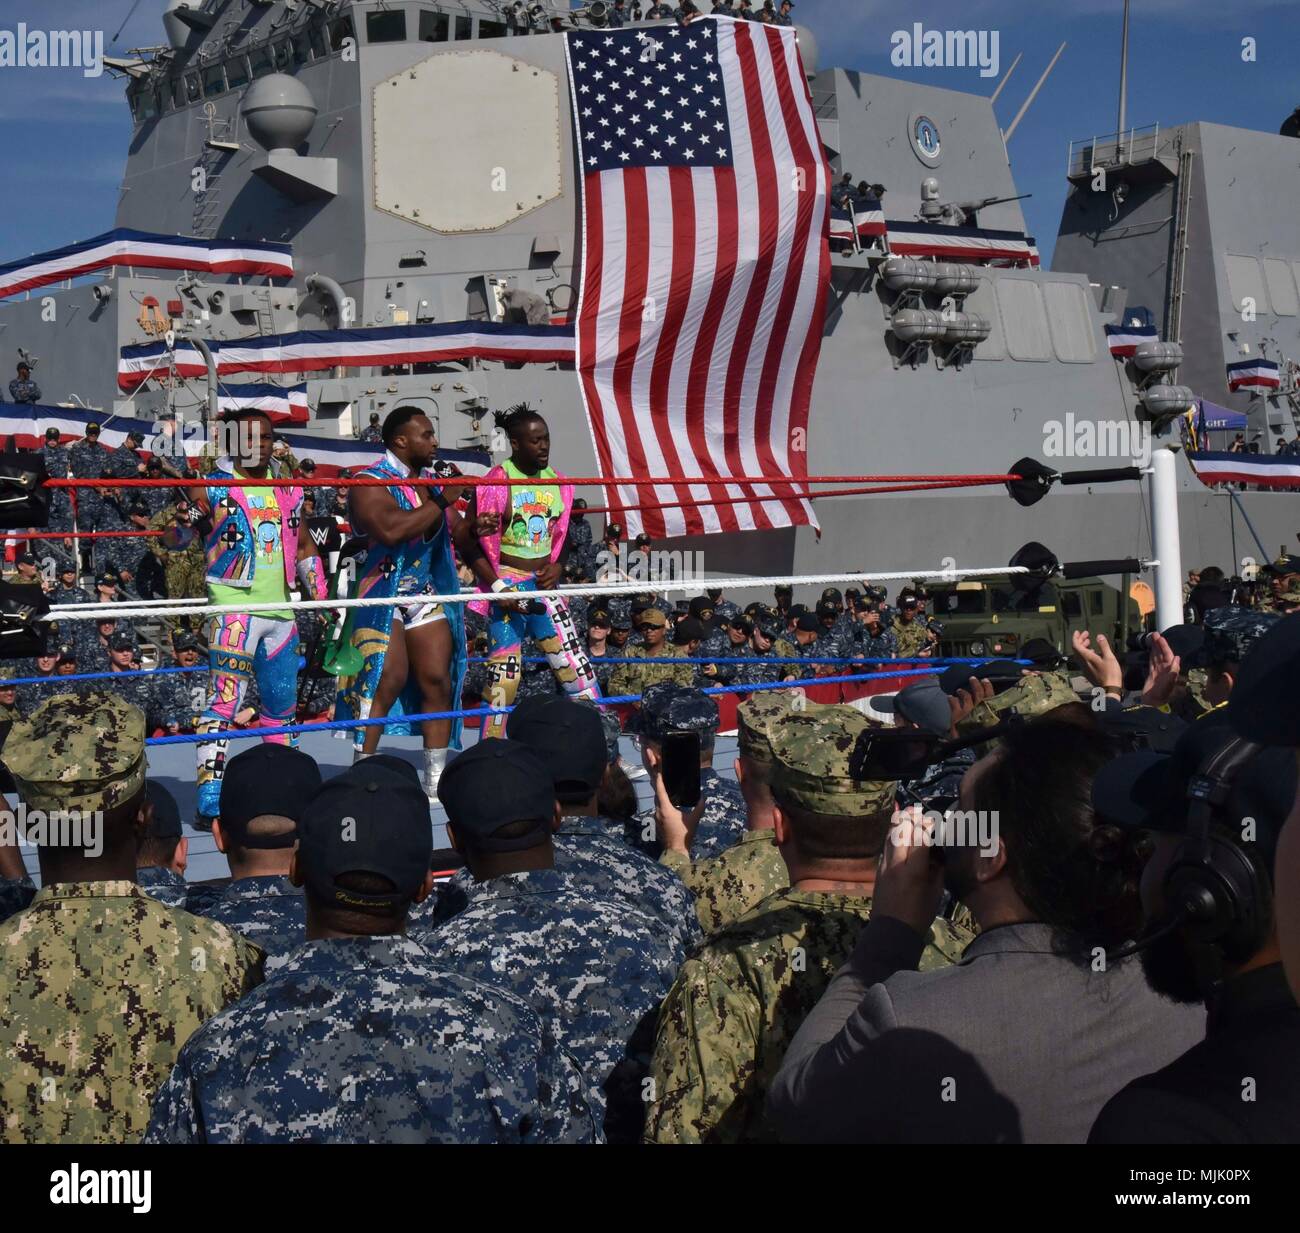 SAN DIEGO (DEC. 5, 2017) World Wrestling Entertainment (WWE) superstars, Xavier Woods, left, “Big E” Langston, center, and Kofi Kingston, talk to Sailors during the 15th annual WWE Tribute to the Troops event, held at Naval Base San Diego. While in San Diego, WWE superstars spent time giving back to military personnel and their families. Activities included a bullying prevention rally, as well as hospital visits and military outreach initiatives at various installations, including Naval Base San Diego, Naval Air Station North Island and Naval Medical Center San Diego. (U.S. Navy photo by Mass  Stock Photo